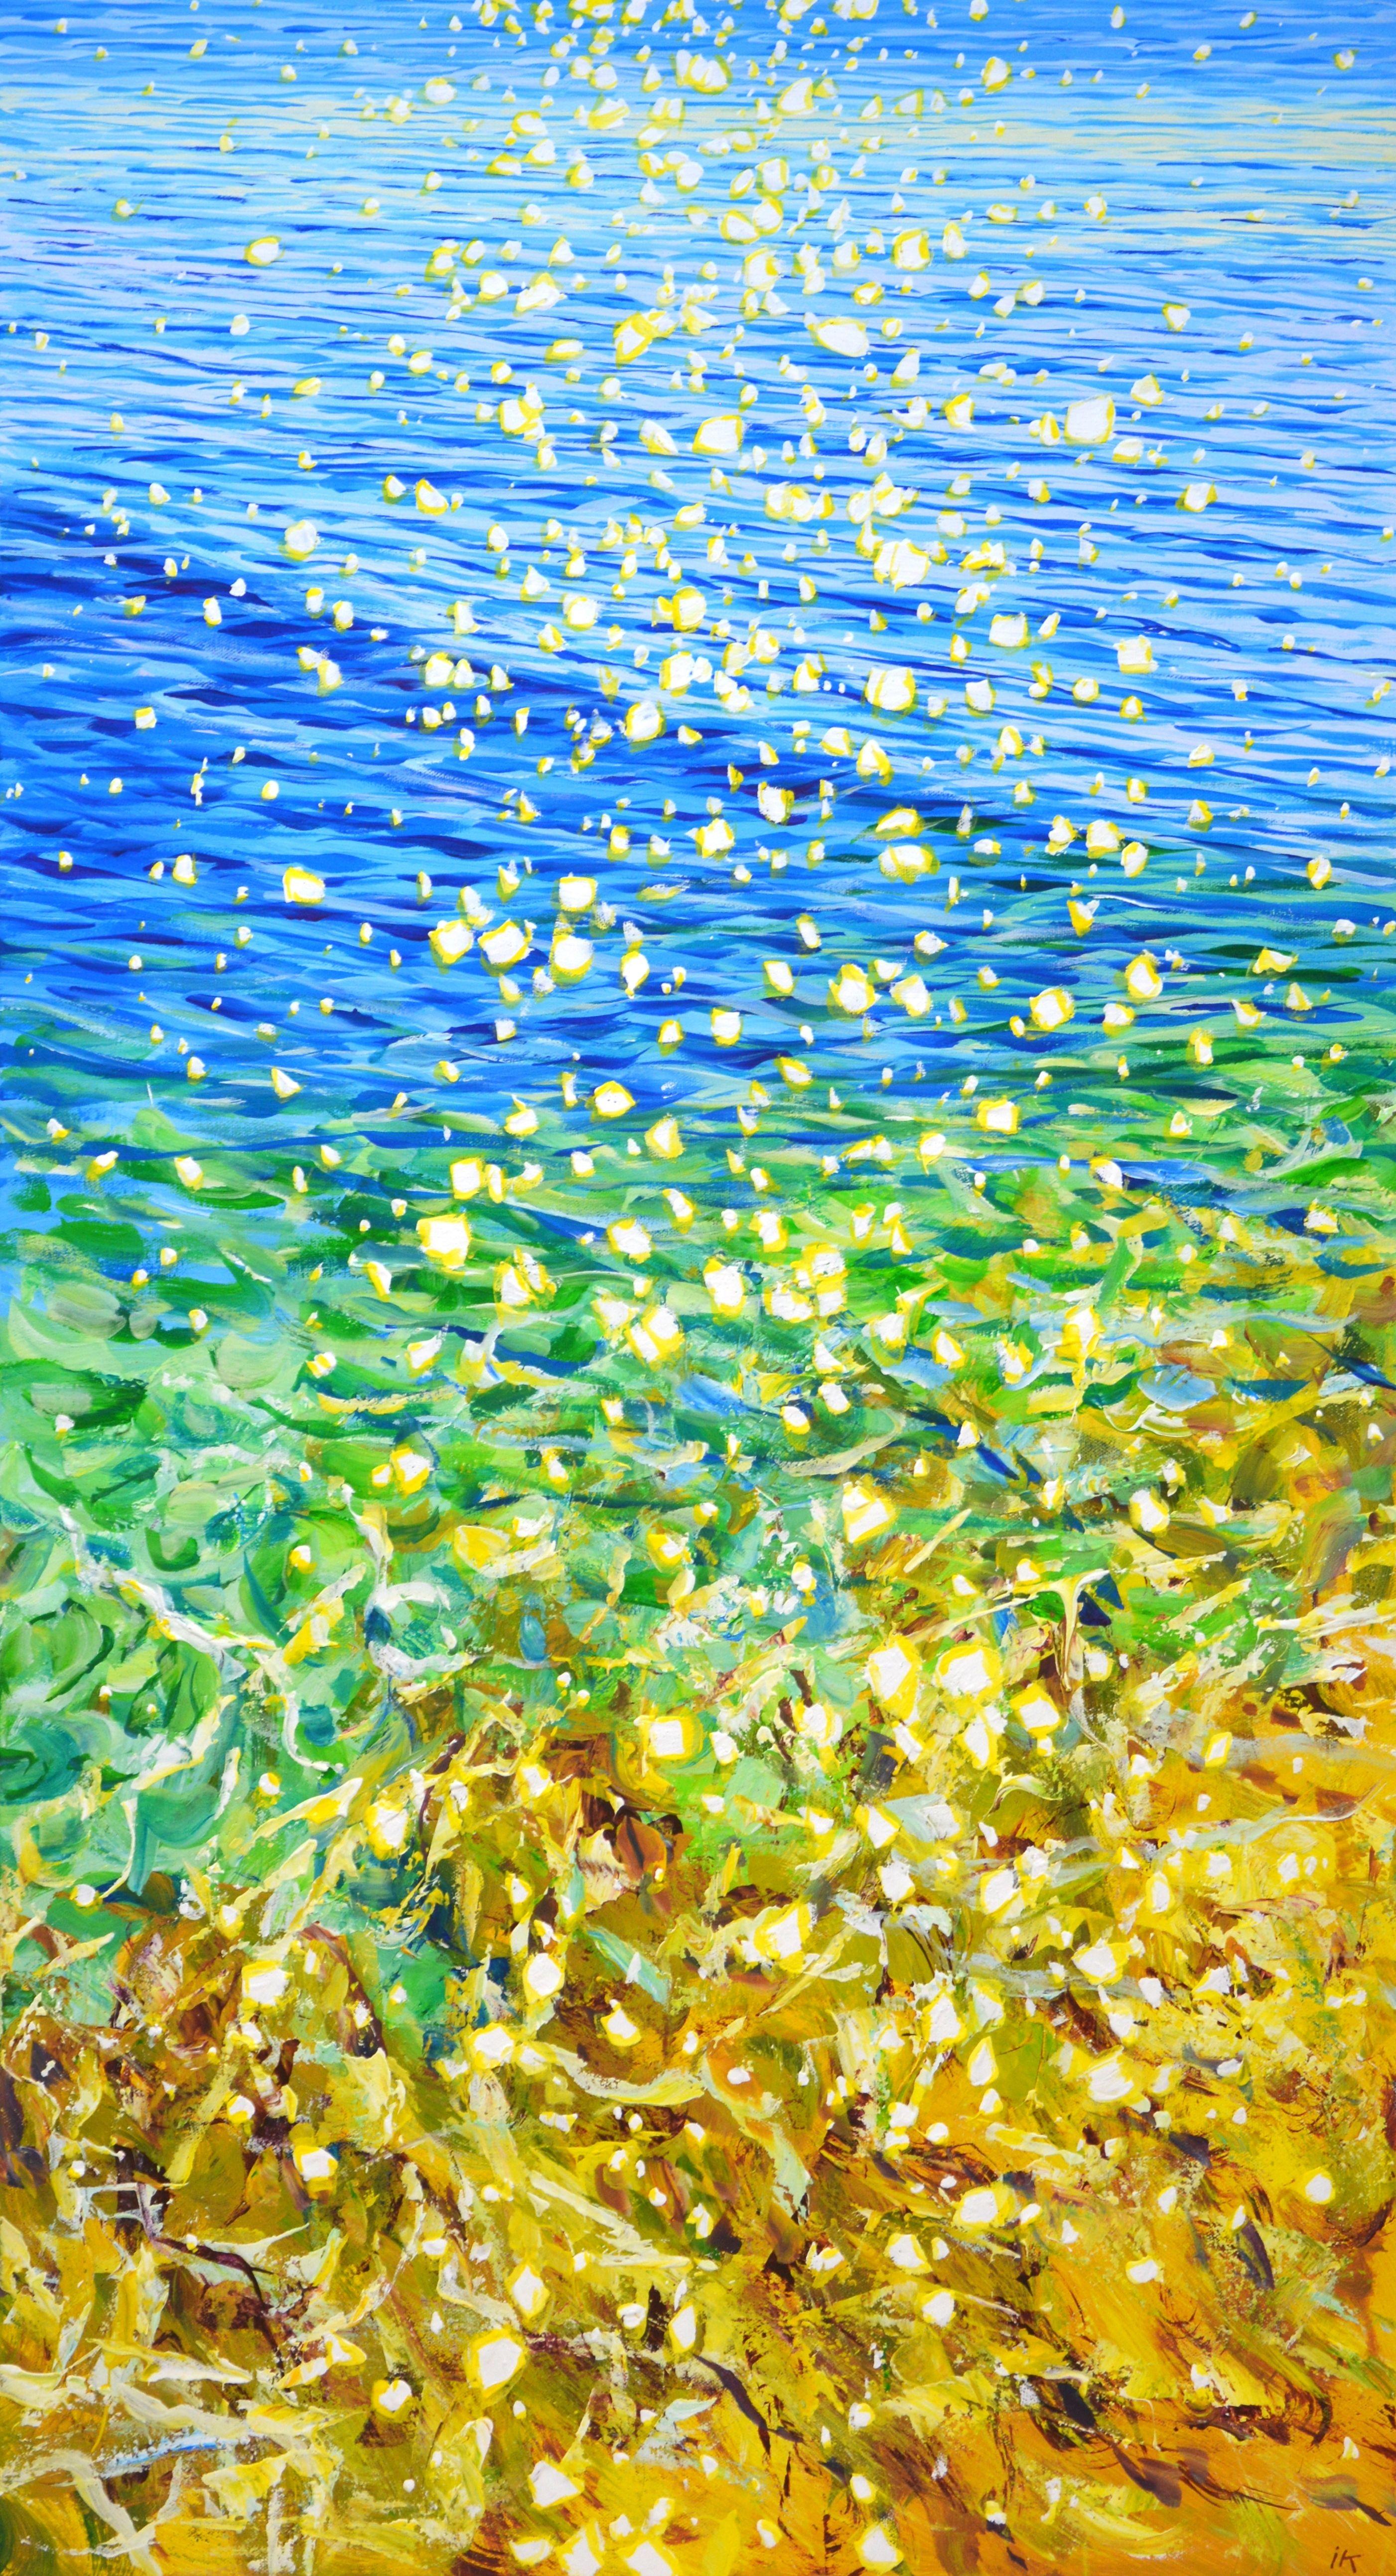 Glare of the sun on the water 5.  Blue water, ocean, small waves, sun glare on the water, sand, beach, create an atmosphere of relaxation and romance. Made in the style of realism, light blue, ocher, white palette emphasizes the energy of water.